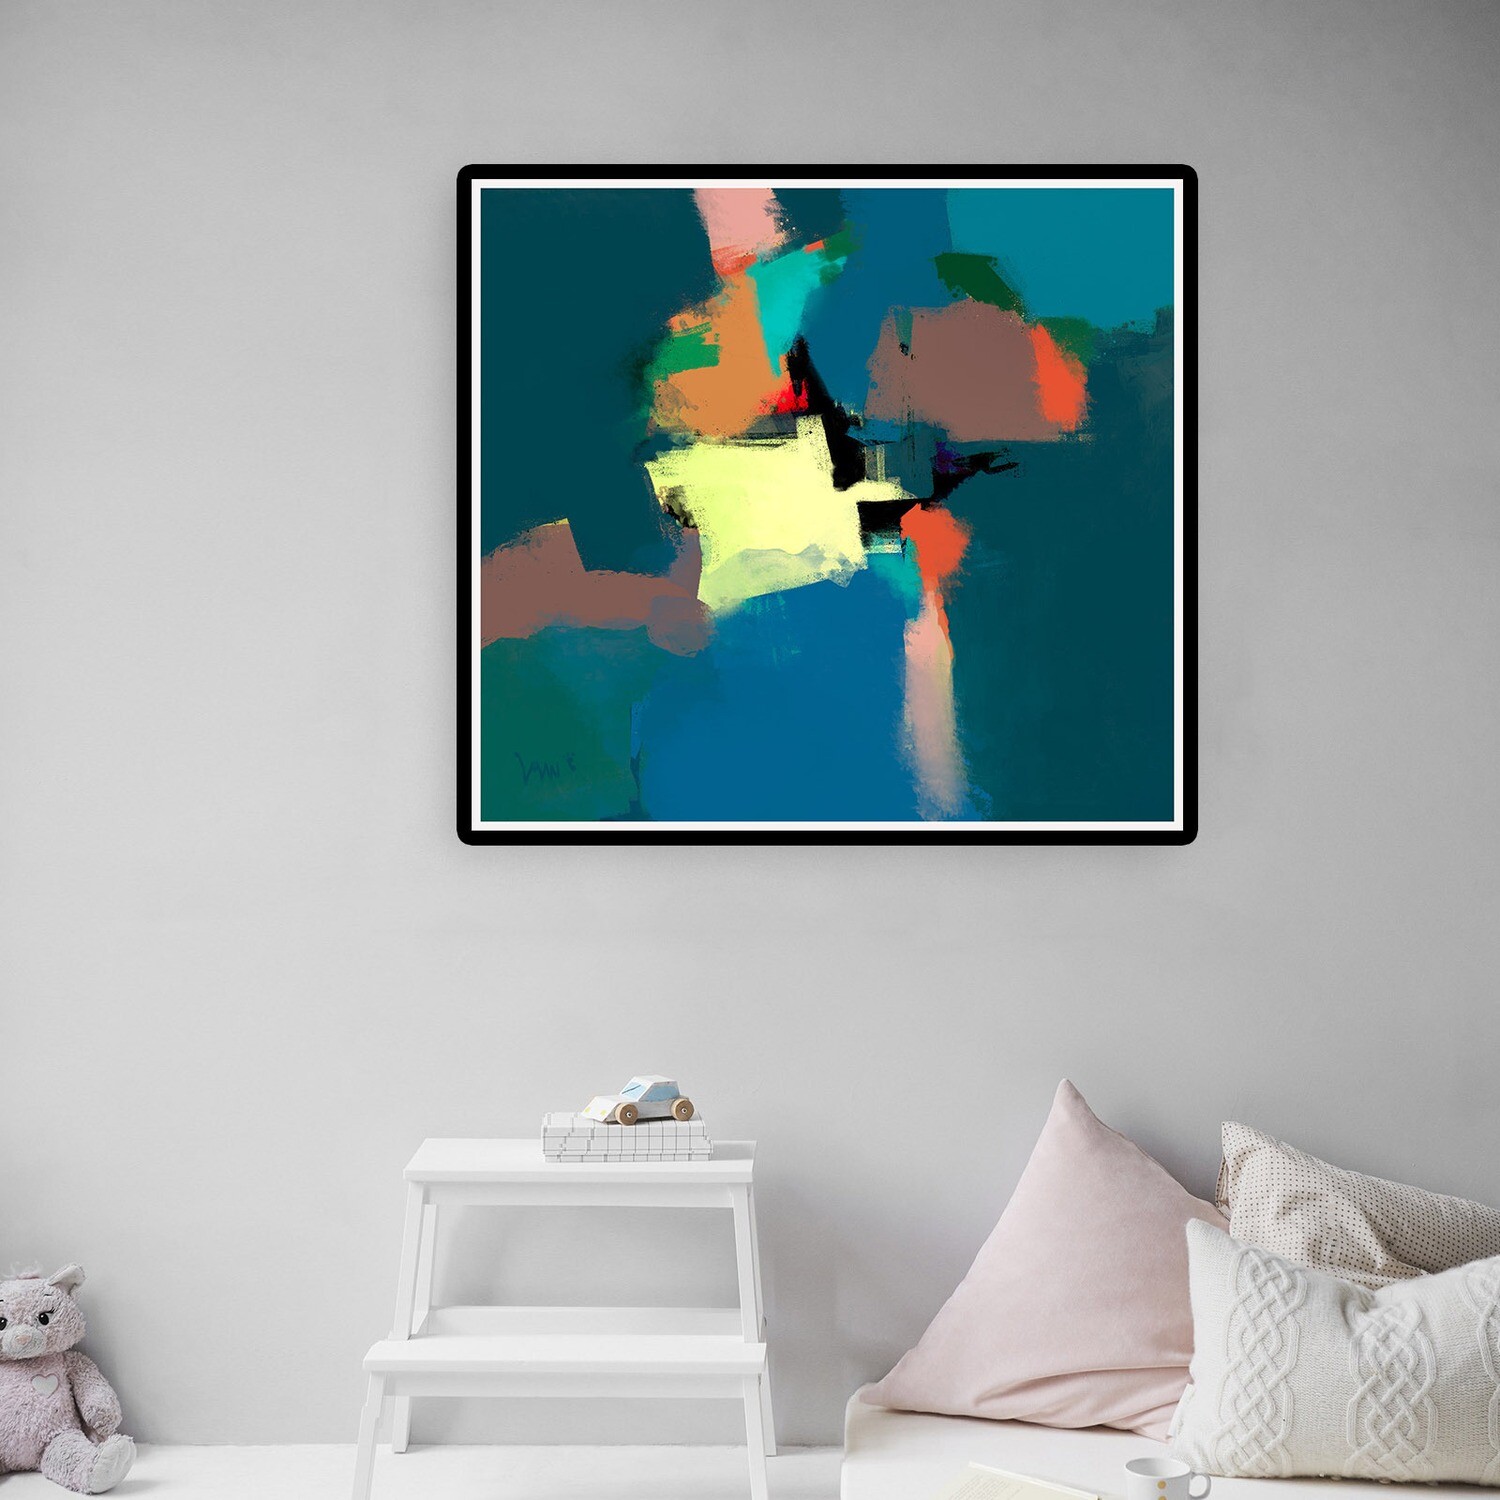 Downloadable Artwork For Home or Office: Inverse Perception 36x36 Inches